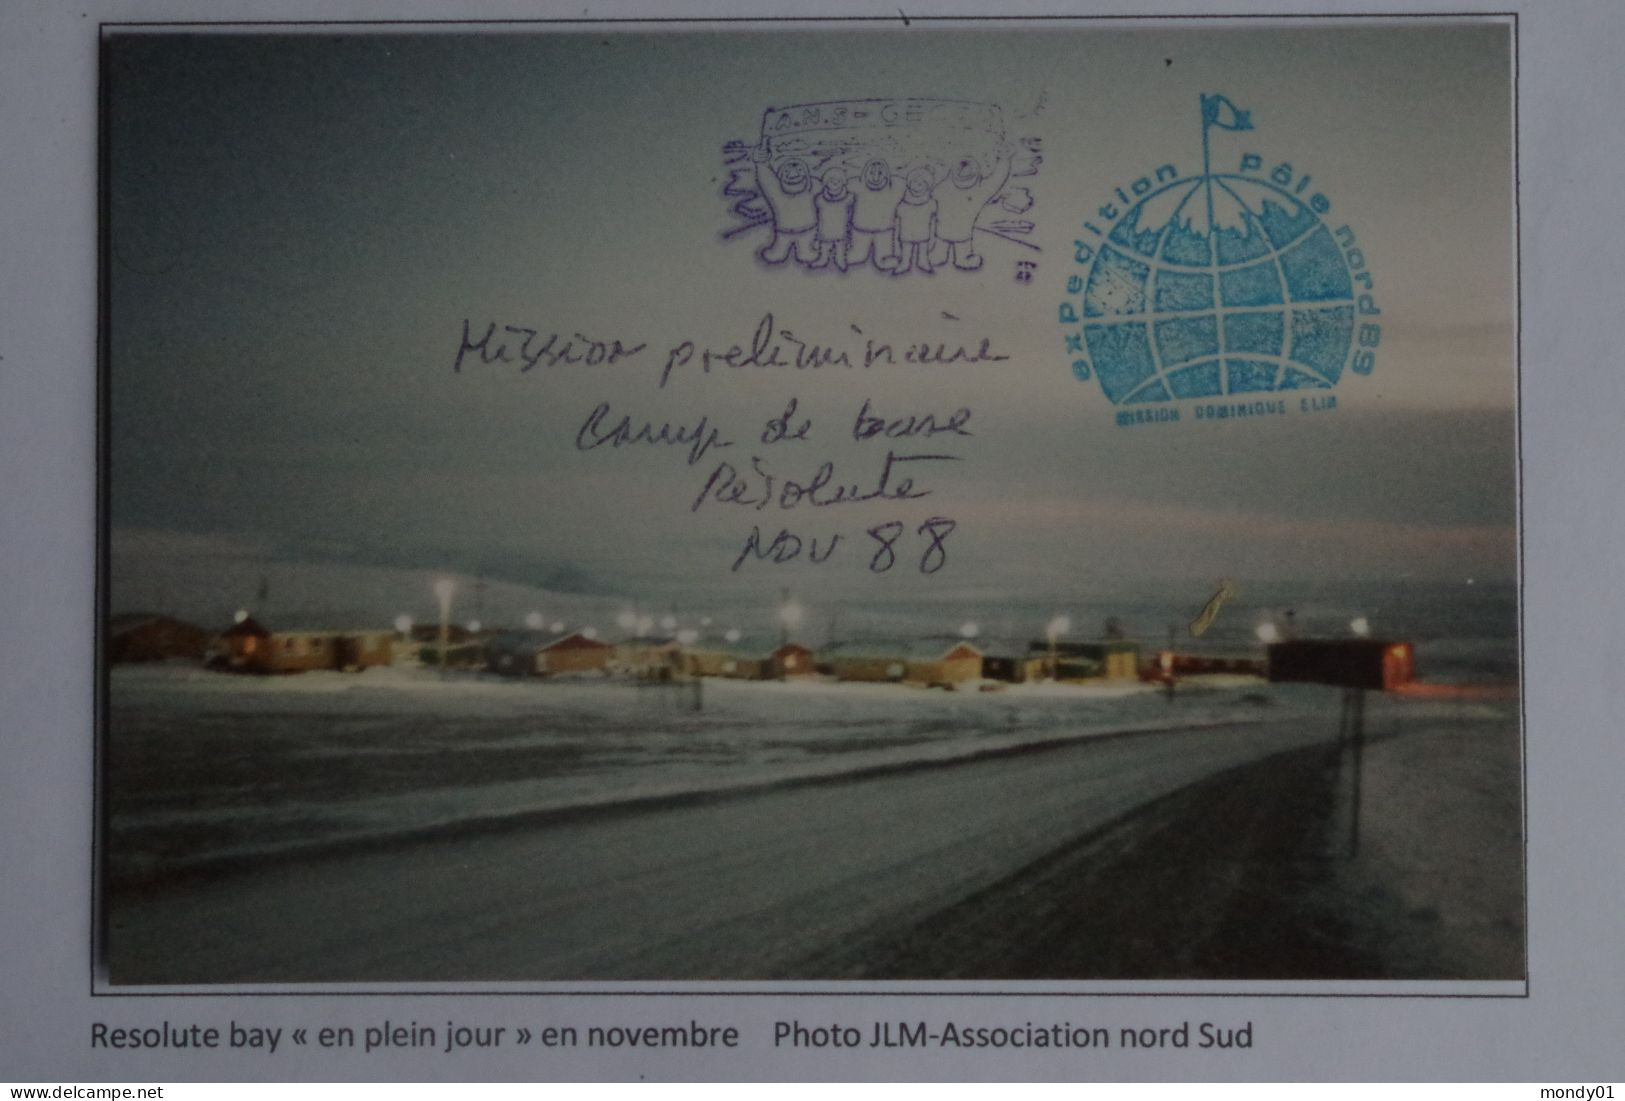 M43/ Resolute Bay Canada Pole Nord Geographique 1988 Photo  Morse Météo Phoque Seal Renard Drifting Ice Island TAAF - Klimaat & Meteorologie